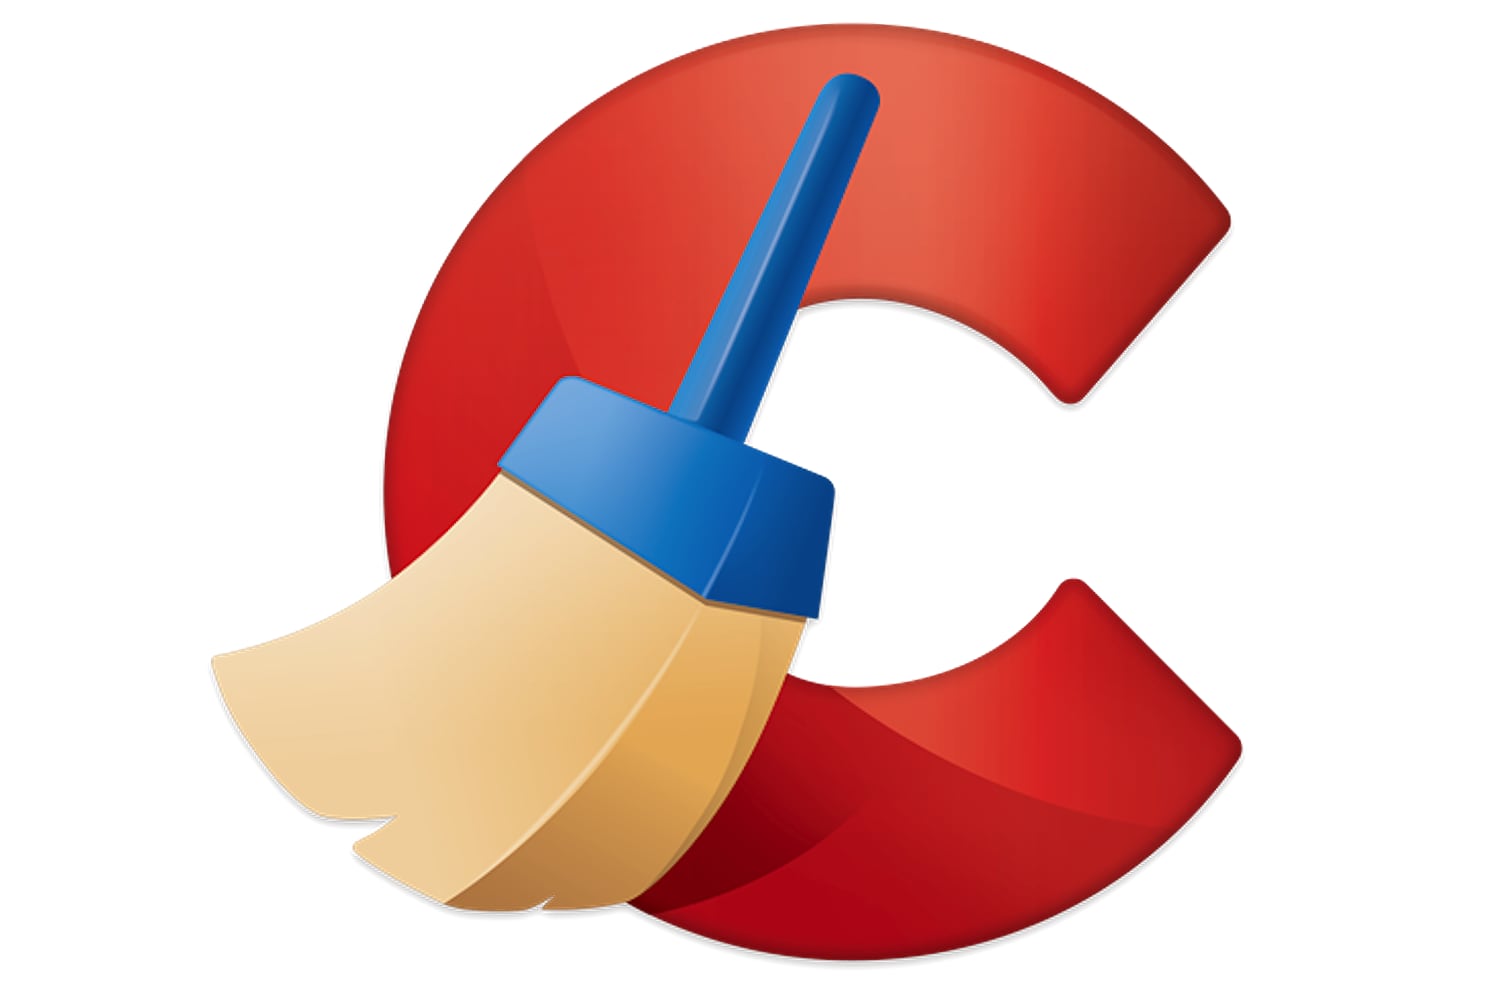 c cleaner for mac reviews